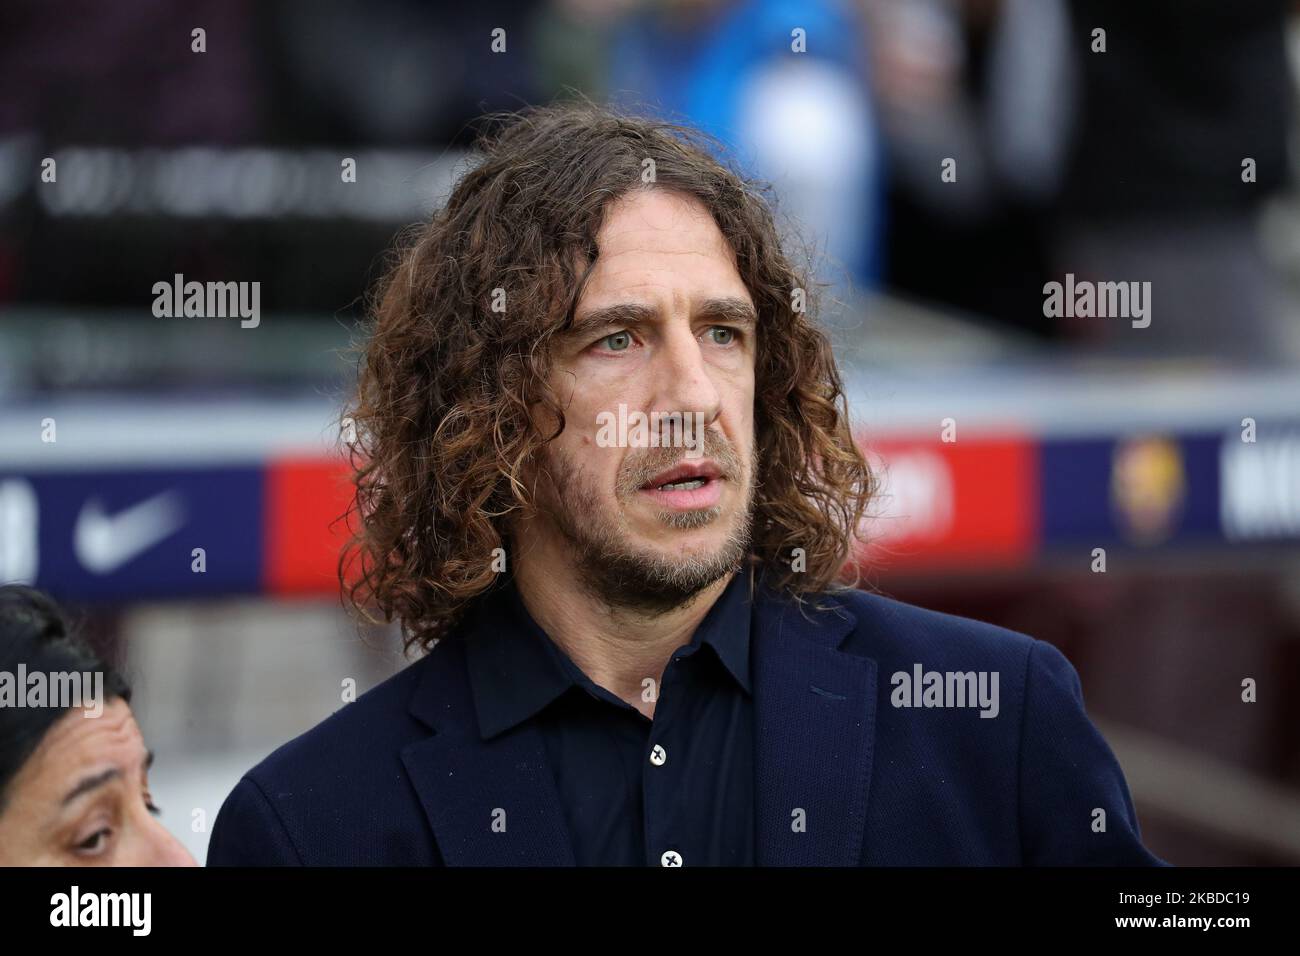 Carles Puyol during the match between FC Barcelona and Deportivo Alaves, corresponding to the week 18 of the Liga Santander, played at the Camp Nou Stadium, on 21th December 2019, in Barcelona, Spain. -- (Photo by Urbanandsport/NurPhoto) Stock Photo